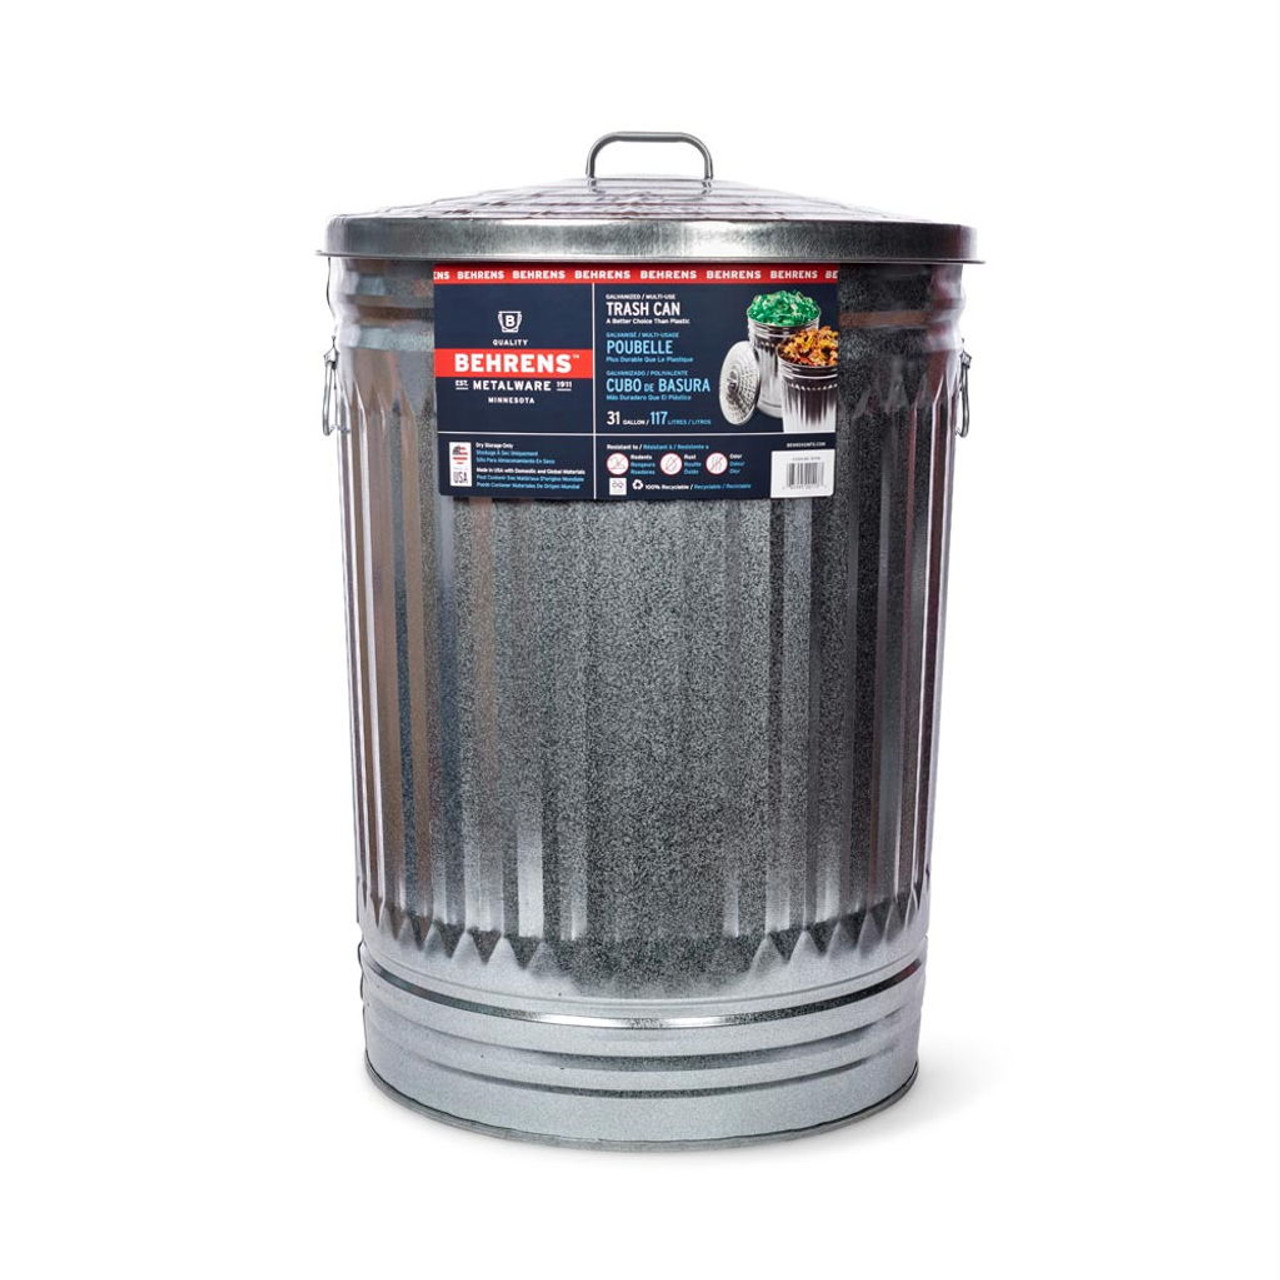 Behrens Galvanized Steel Trash Can With Lid - 31 Gal